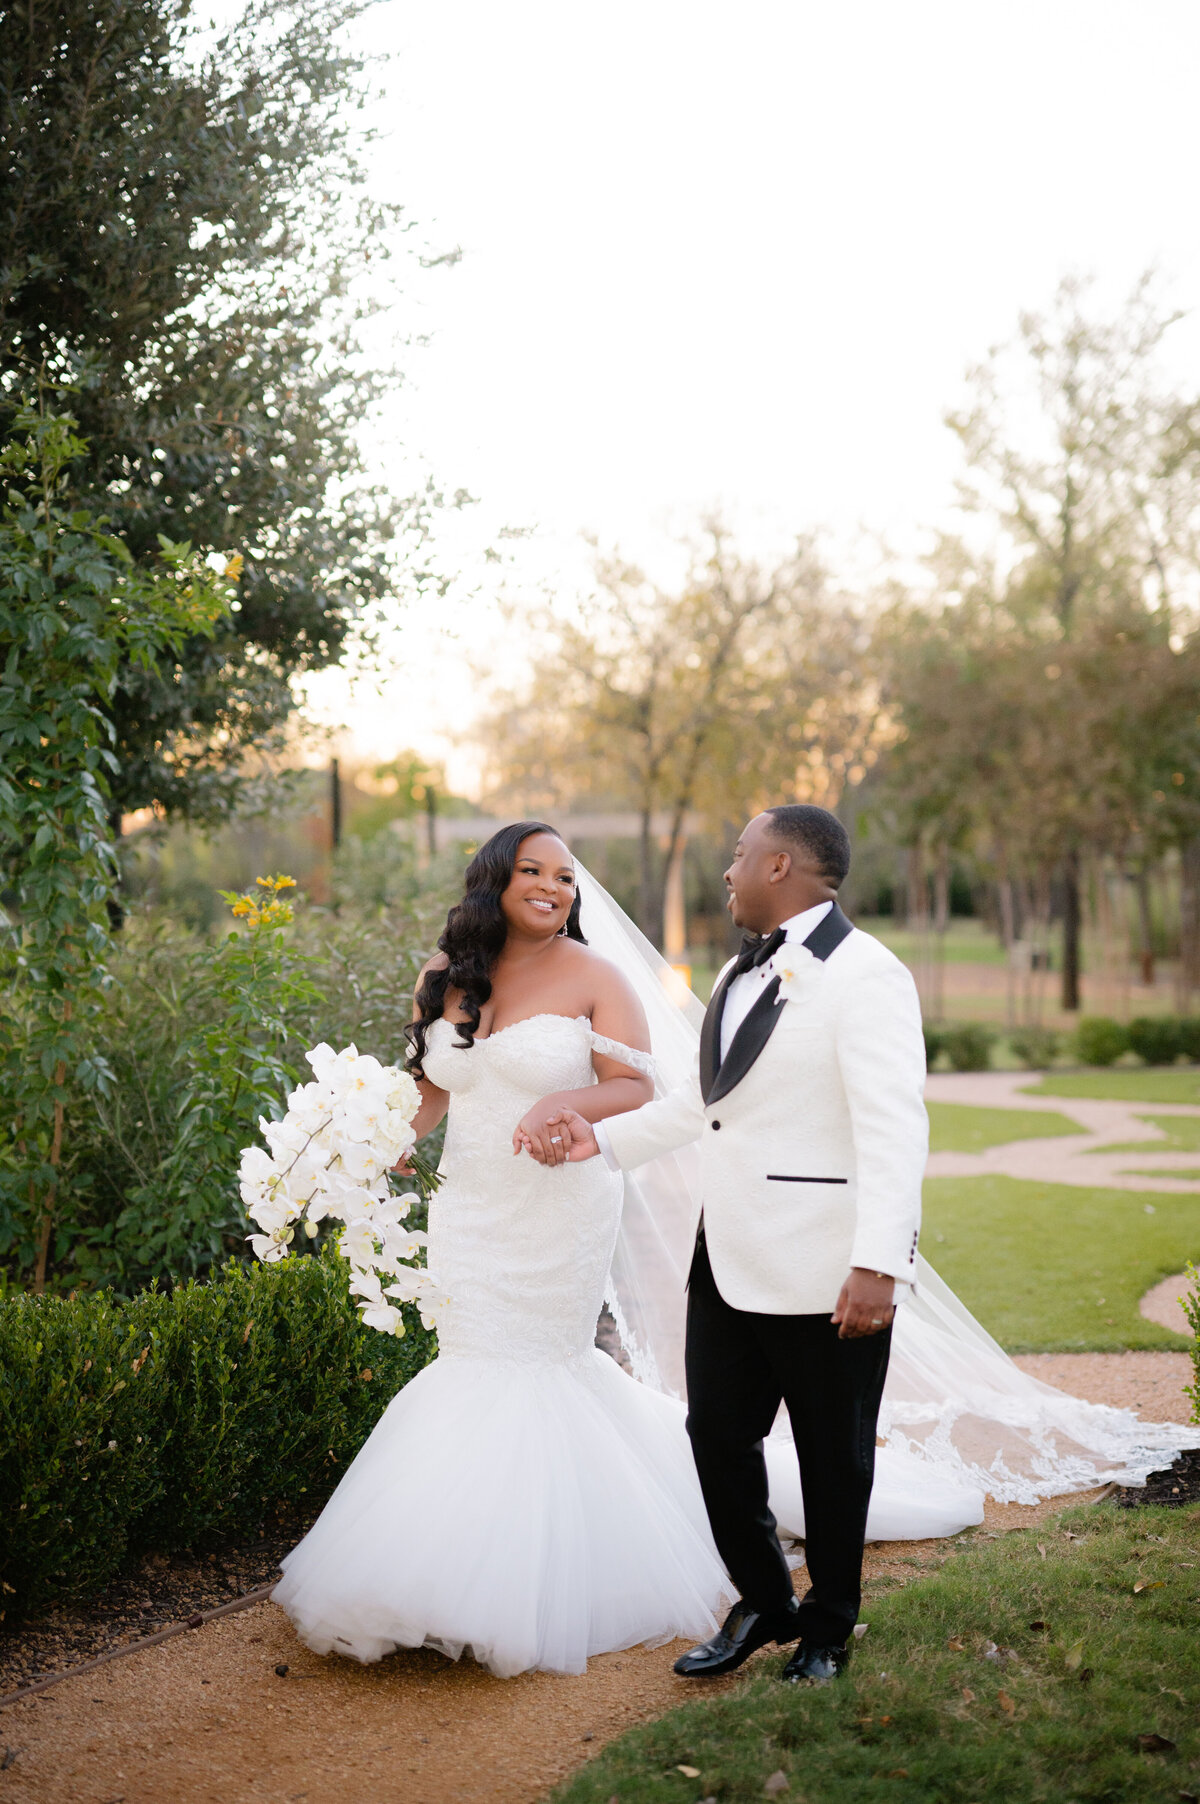 Wedding at Knotting Hill Place in Little Elm, Texas - 63